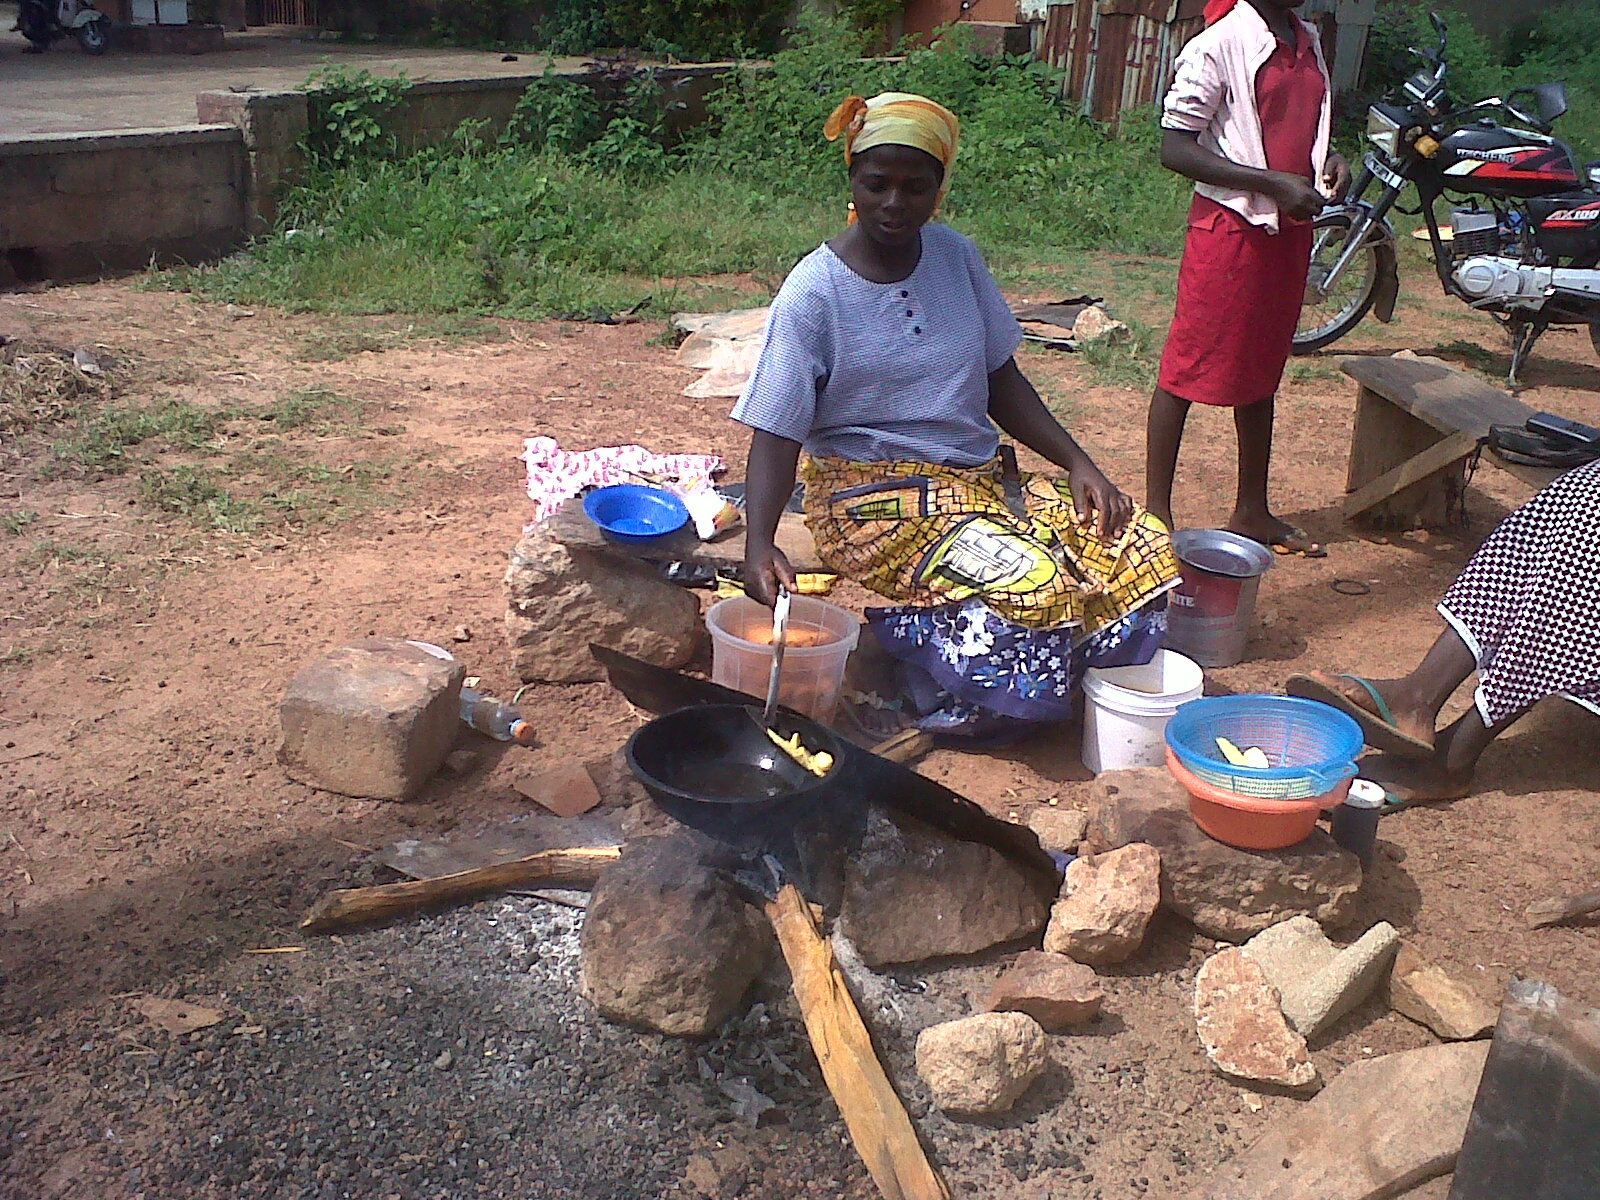 A woman busy with her commercial cooking trade (Source: Greengirl)